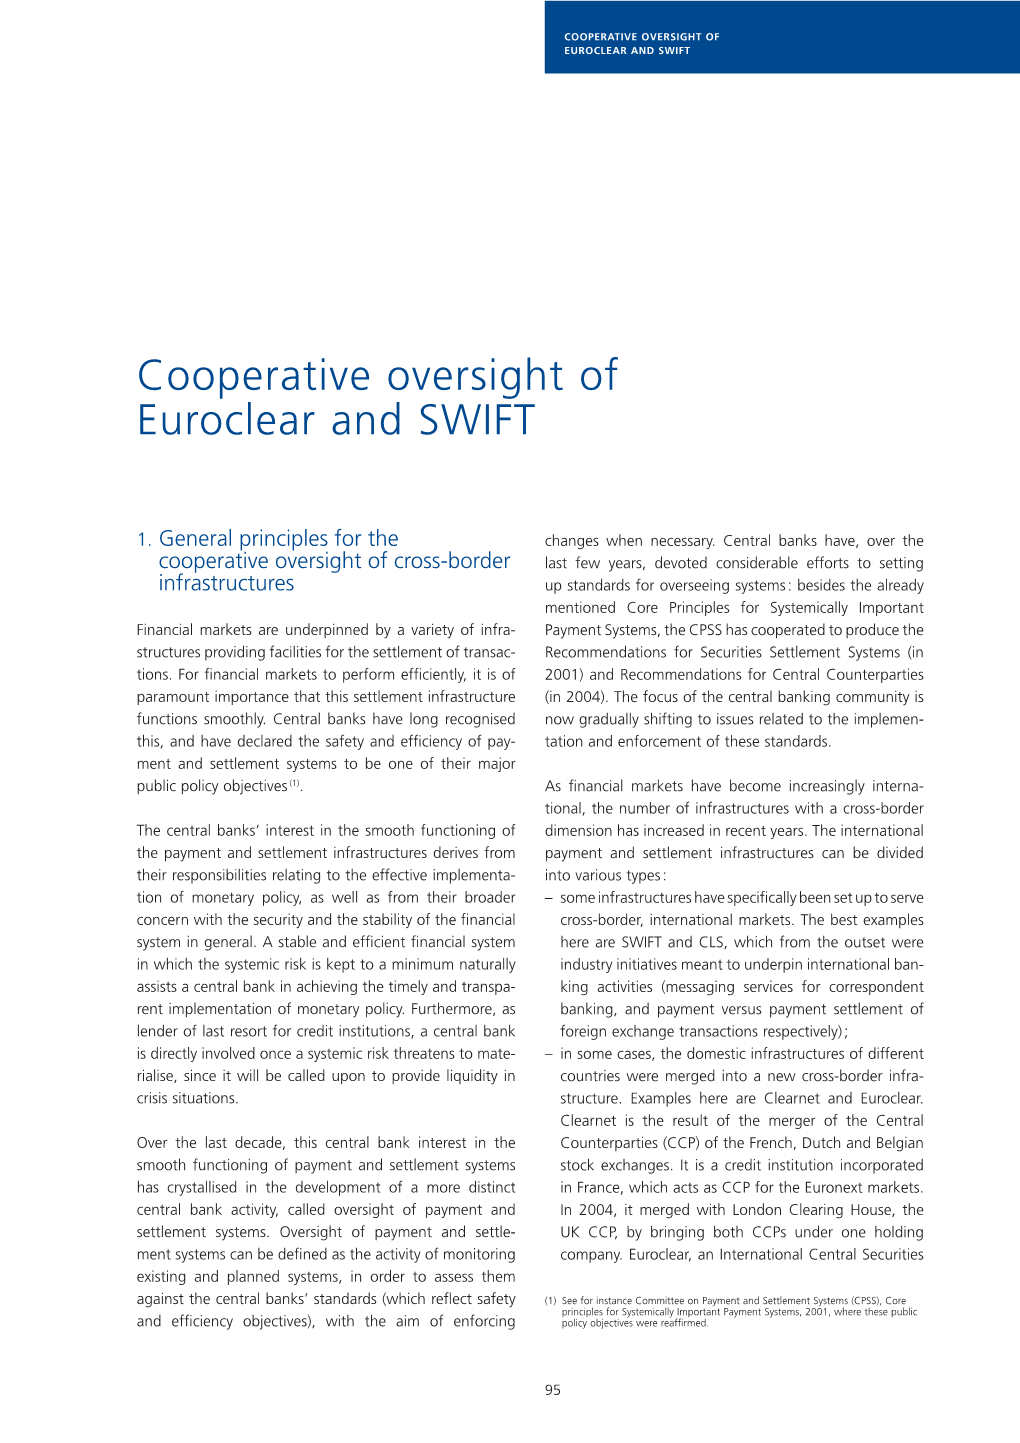 Cooperative Oversight of Euroclear and Swift